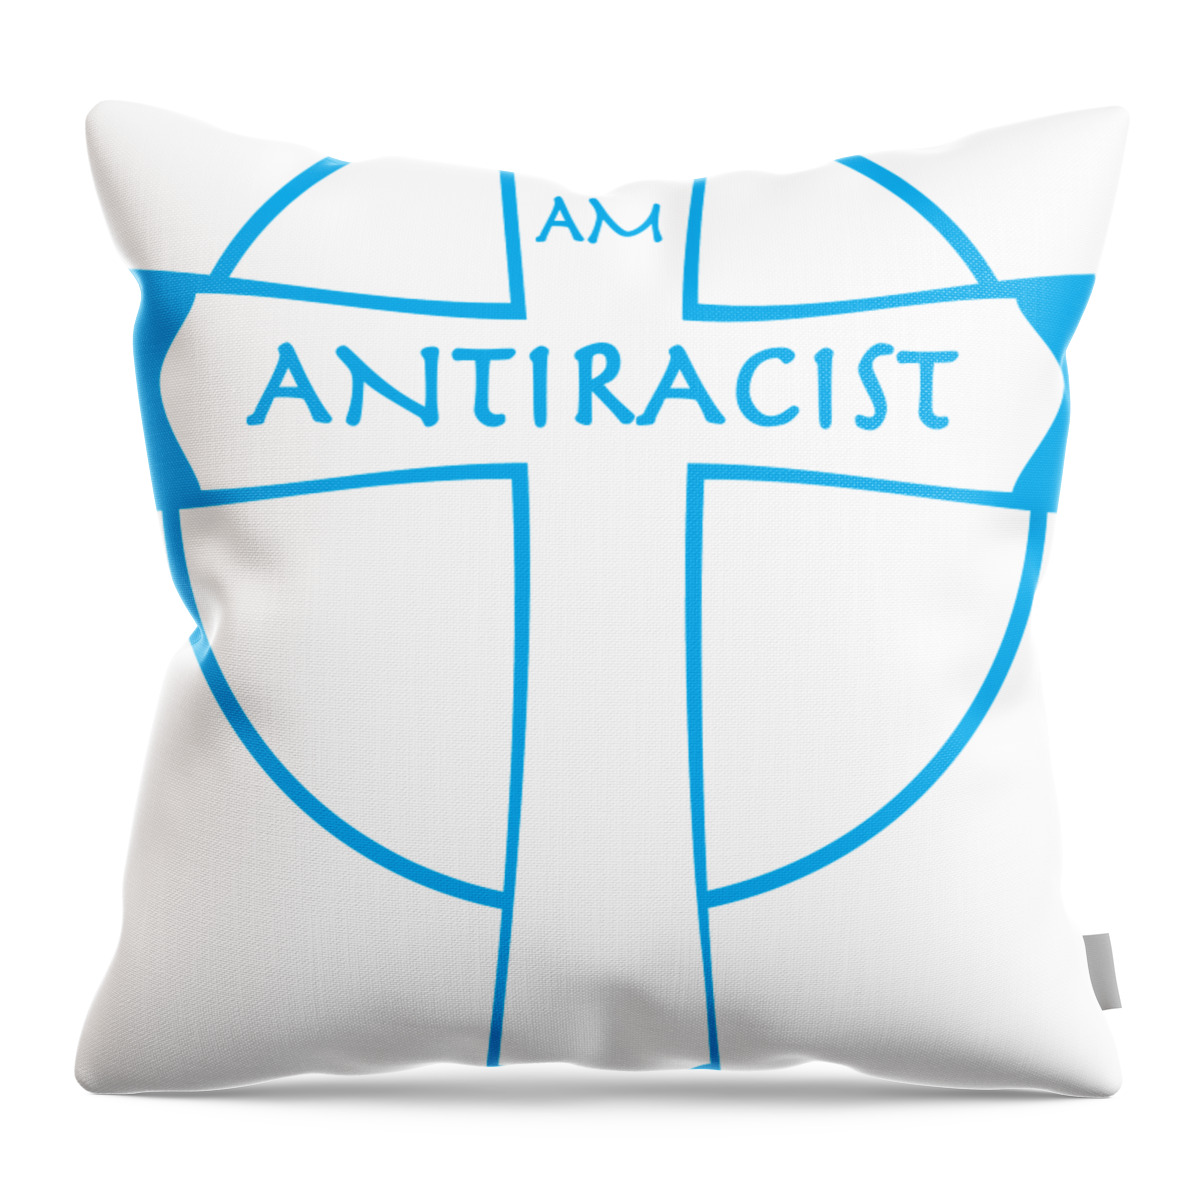 Antiracist Throw Pillow featuring the digital art Antiracist Cross Light Blue by LaSonia Ragsdale